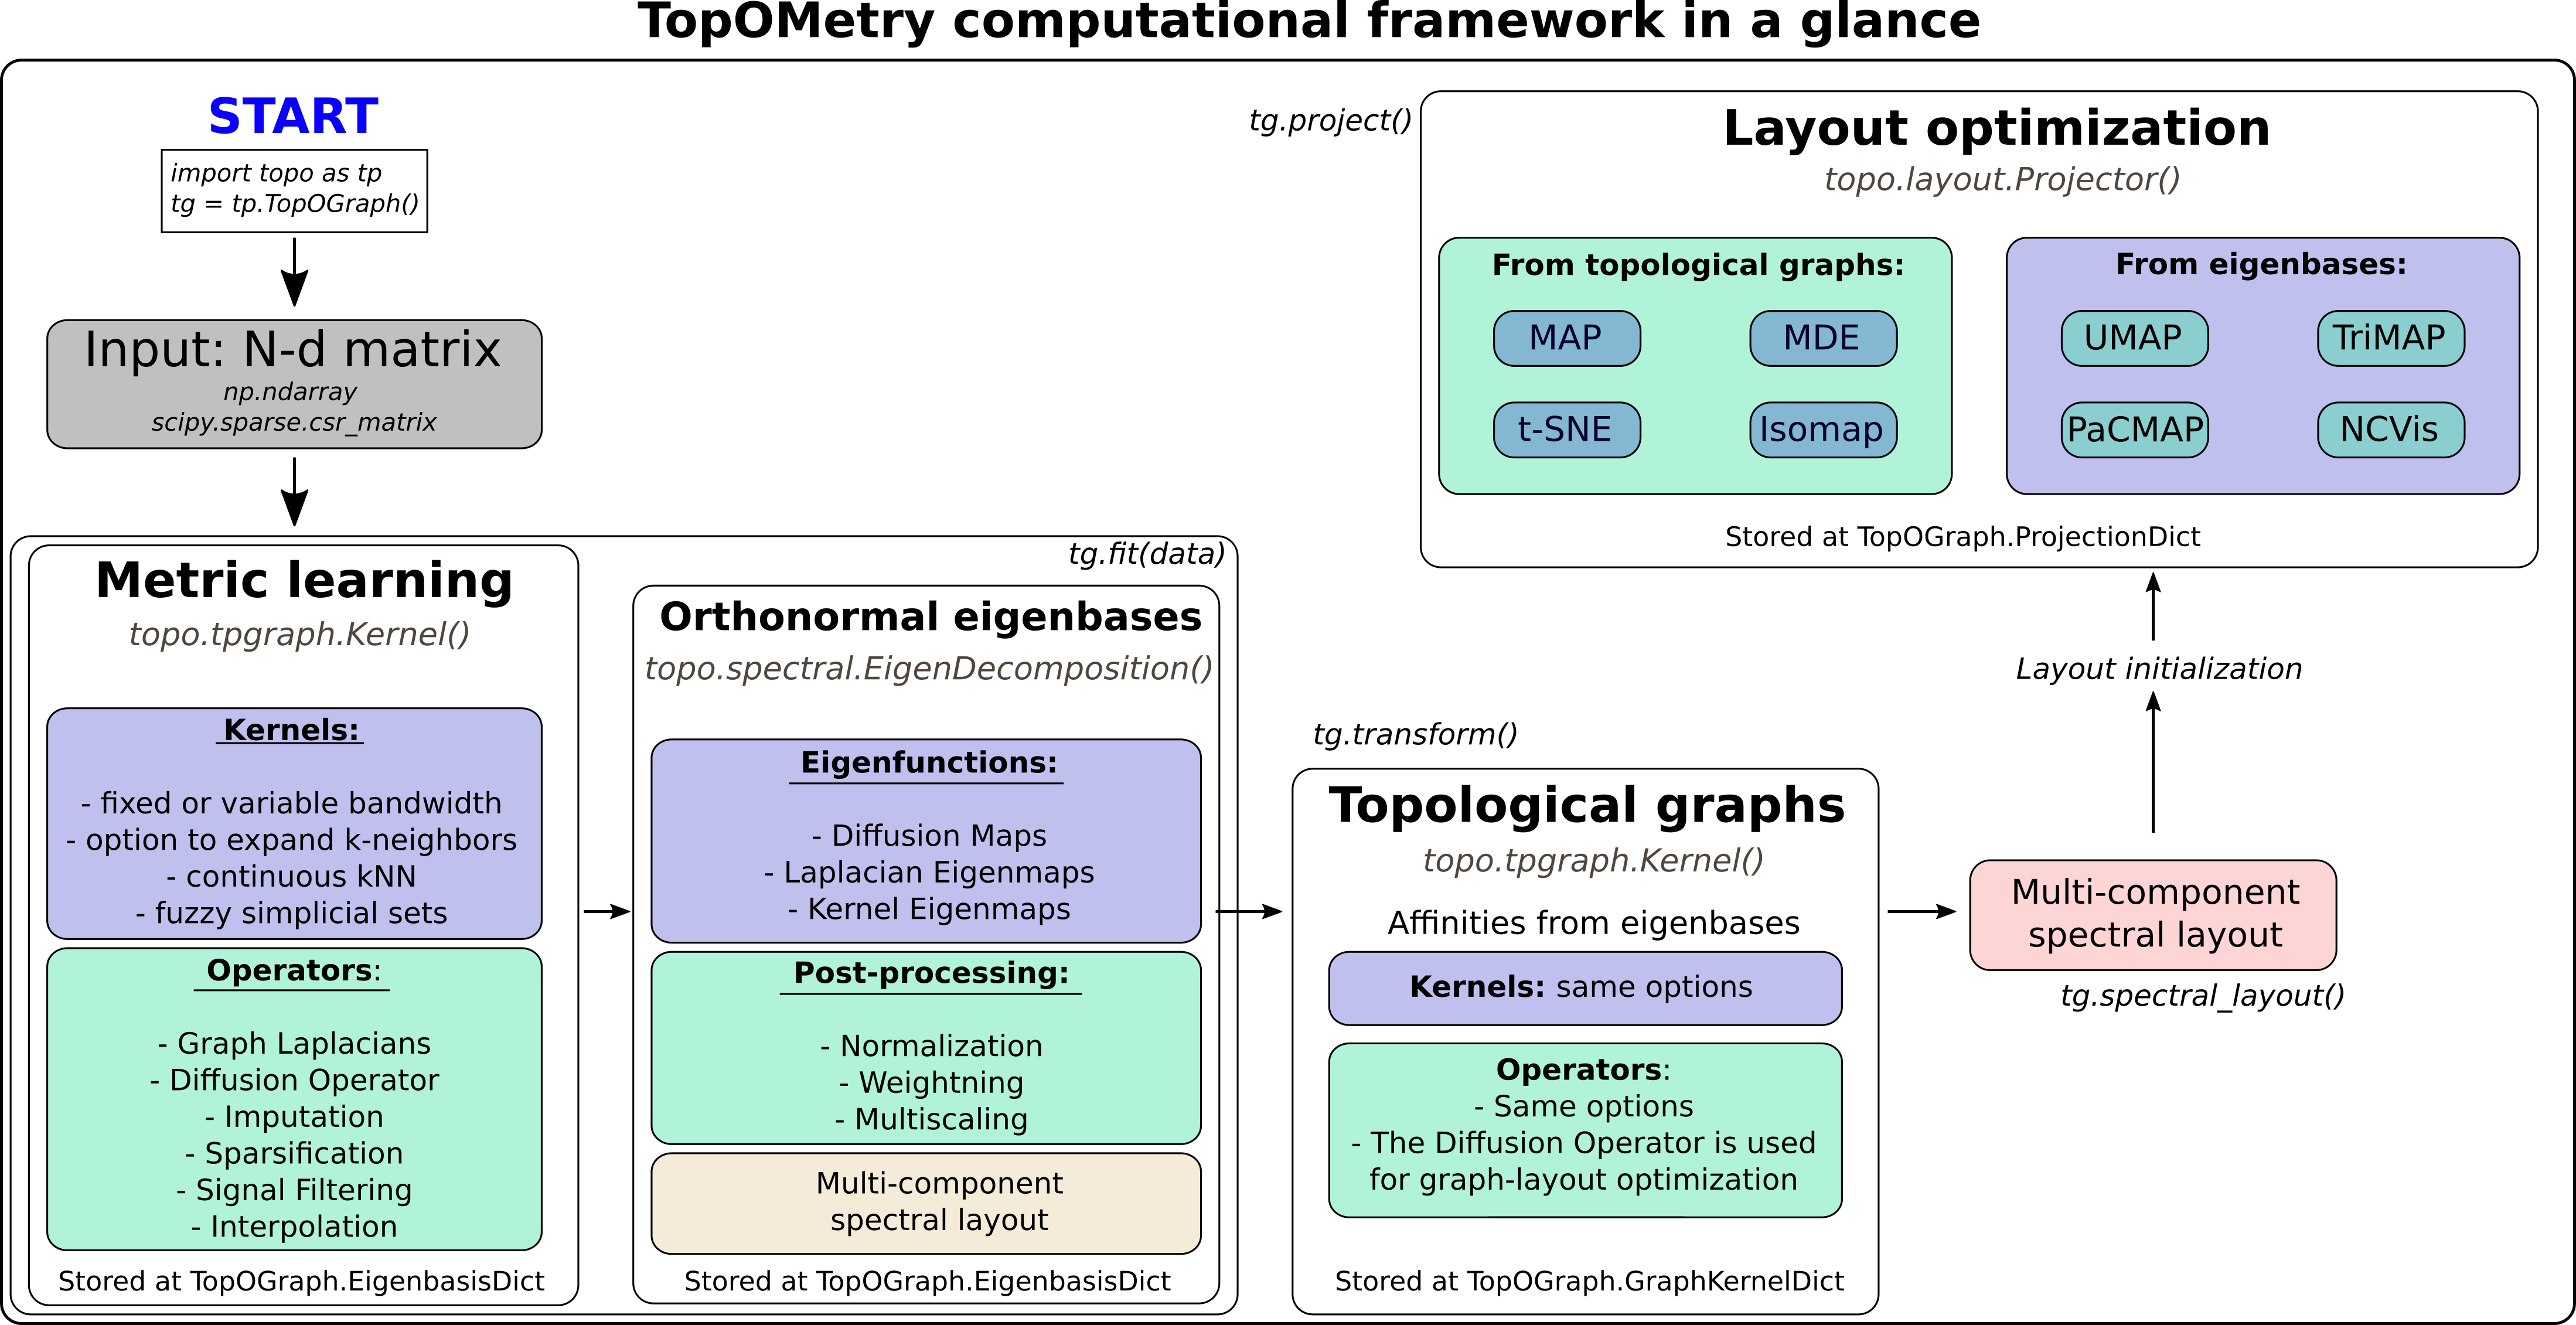 TopOMetry in a glance